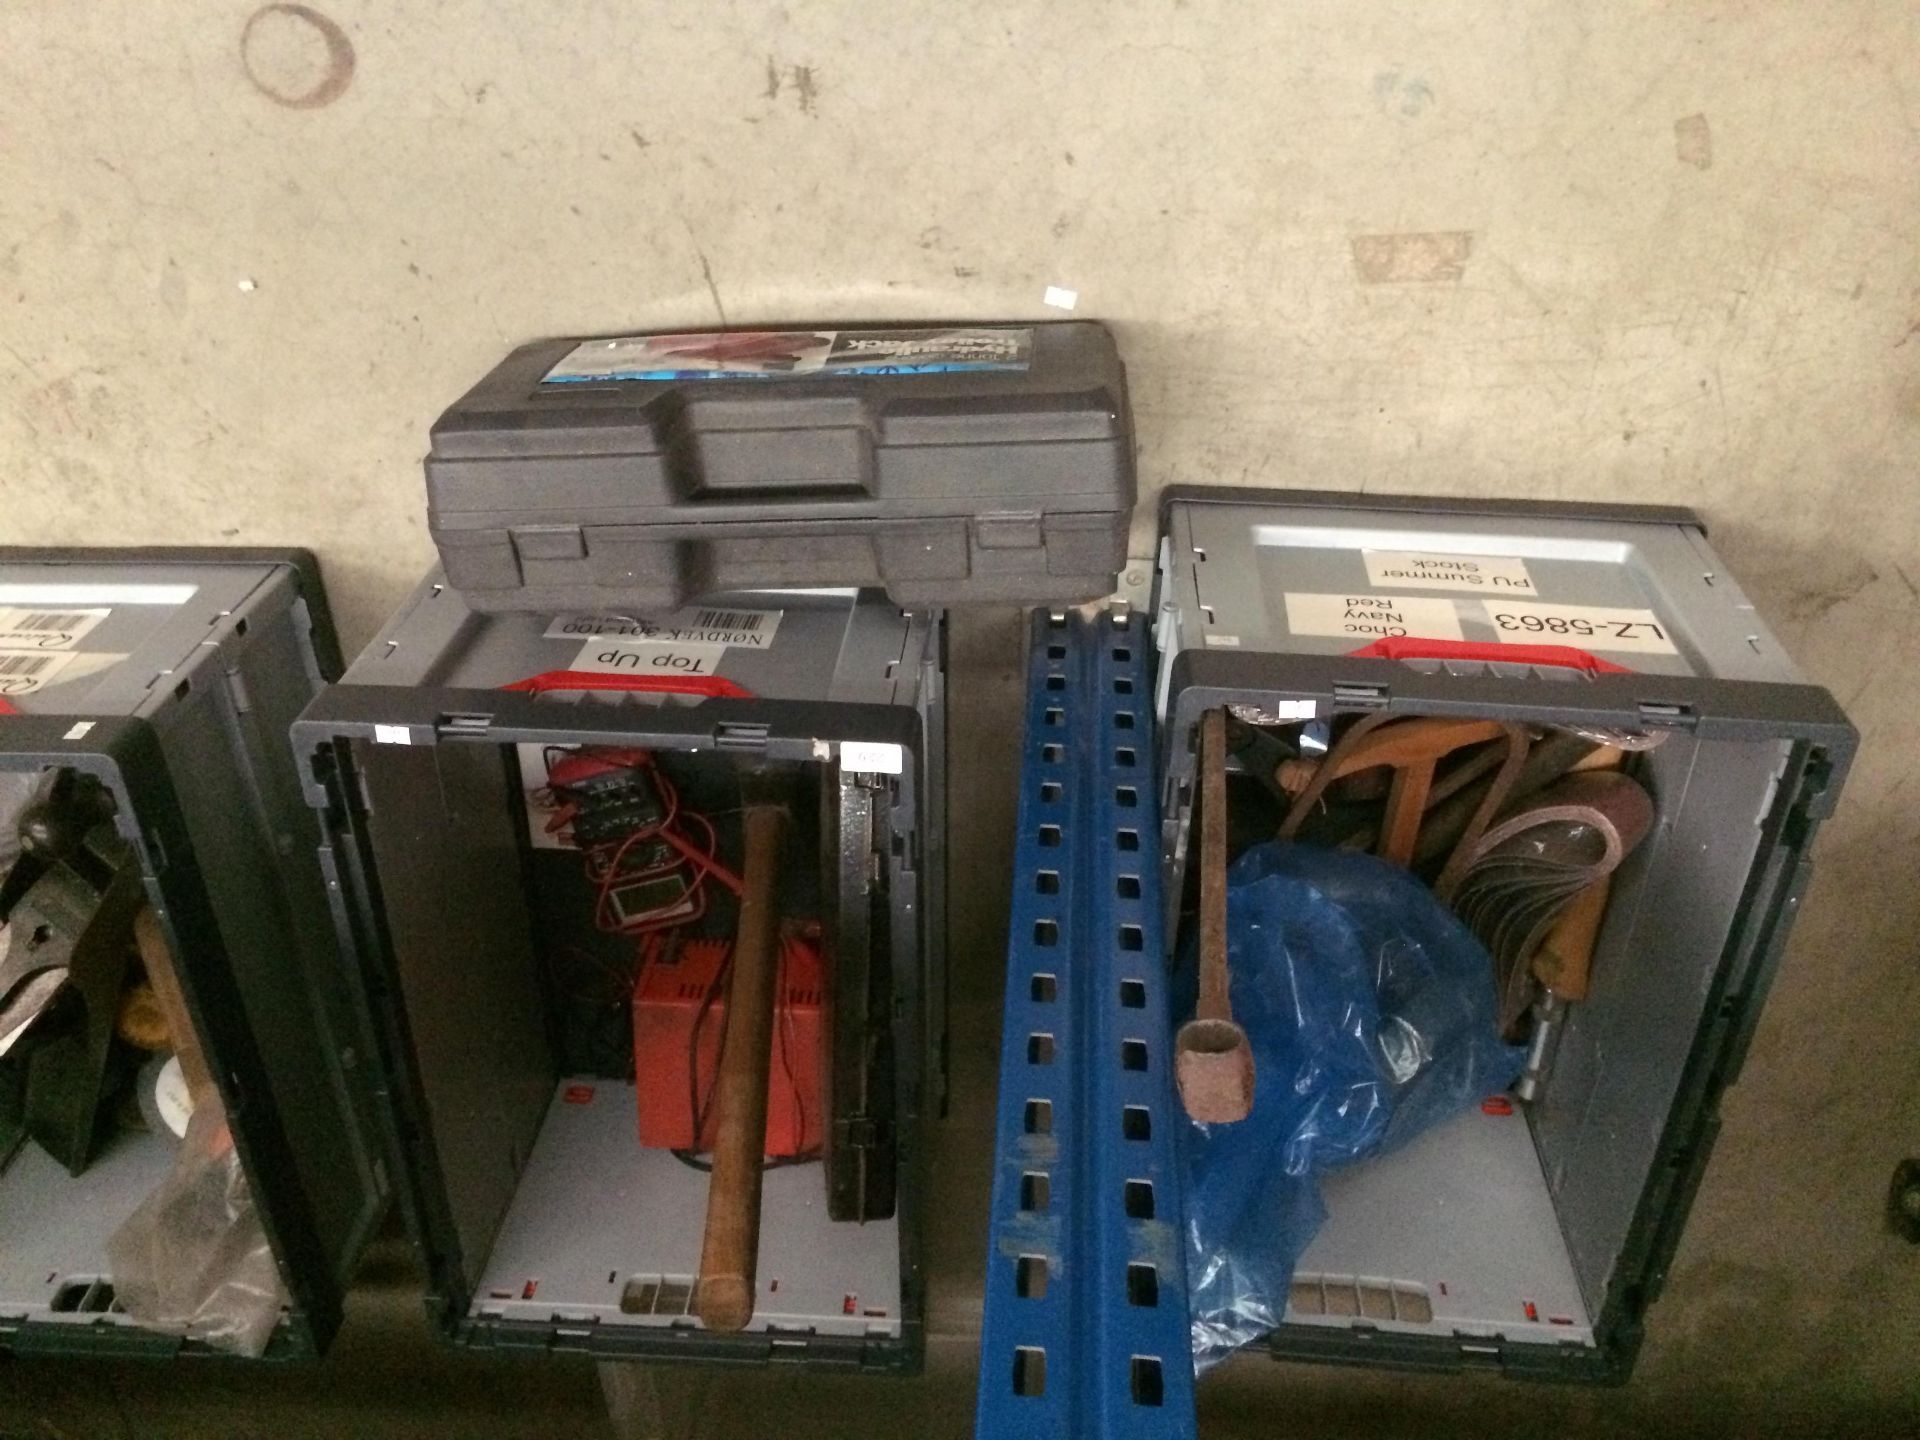 Contents to two crates - socket set, axe, belt sander pads, digital multimeter, battery charge,